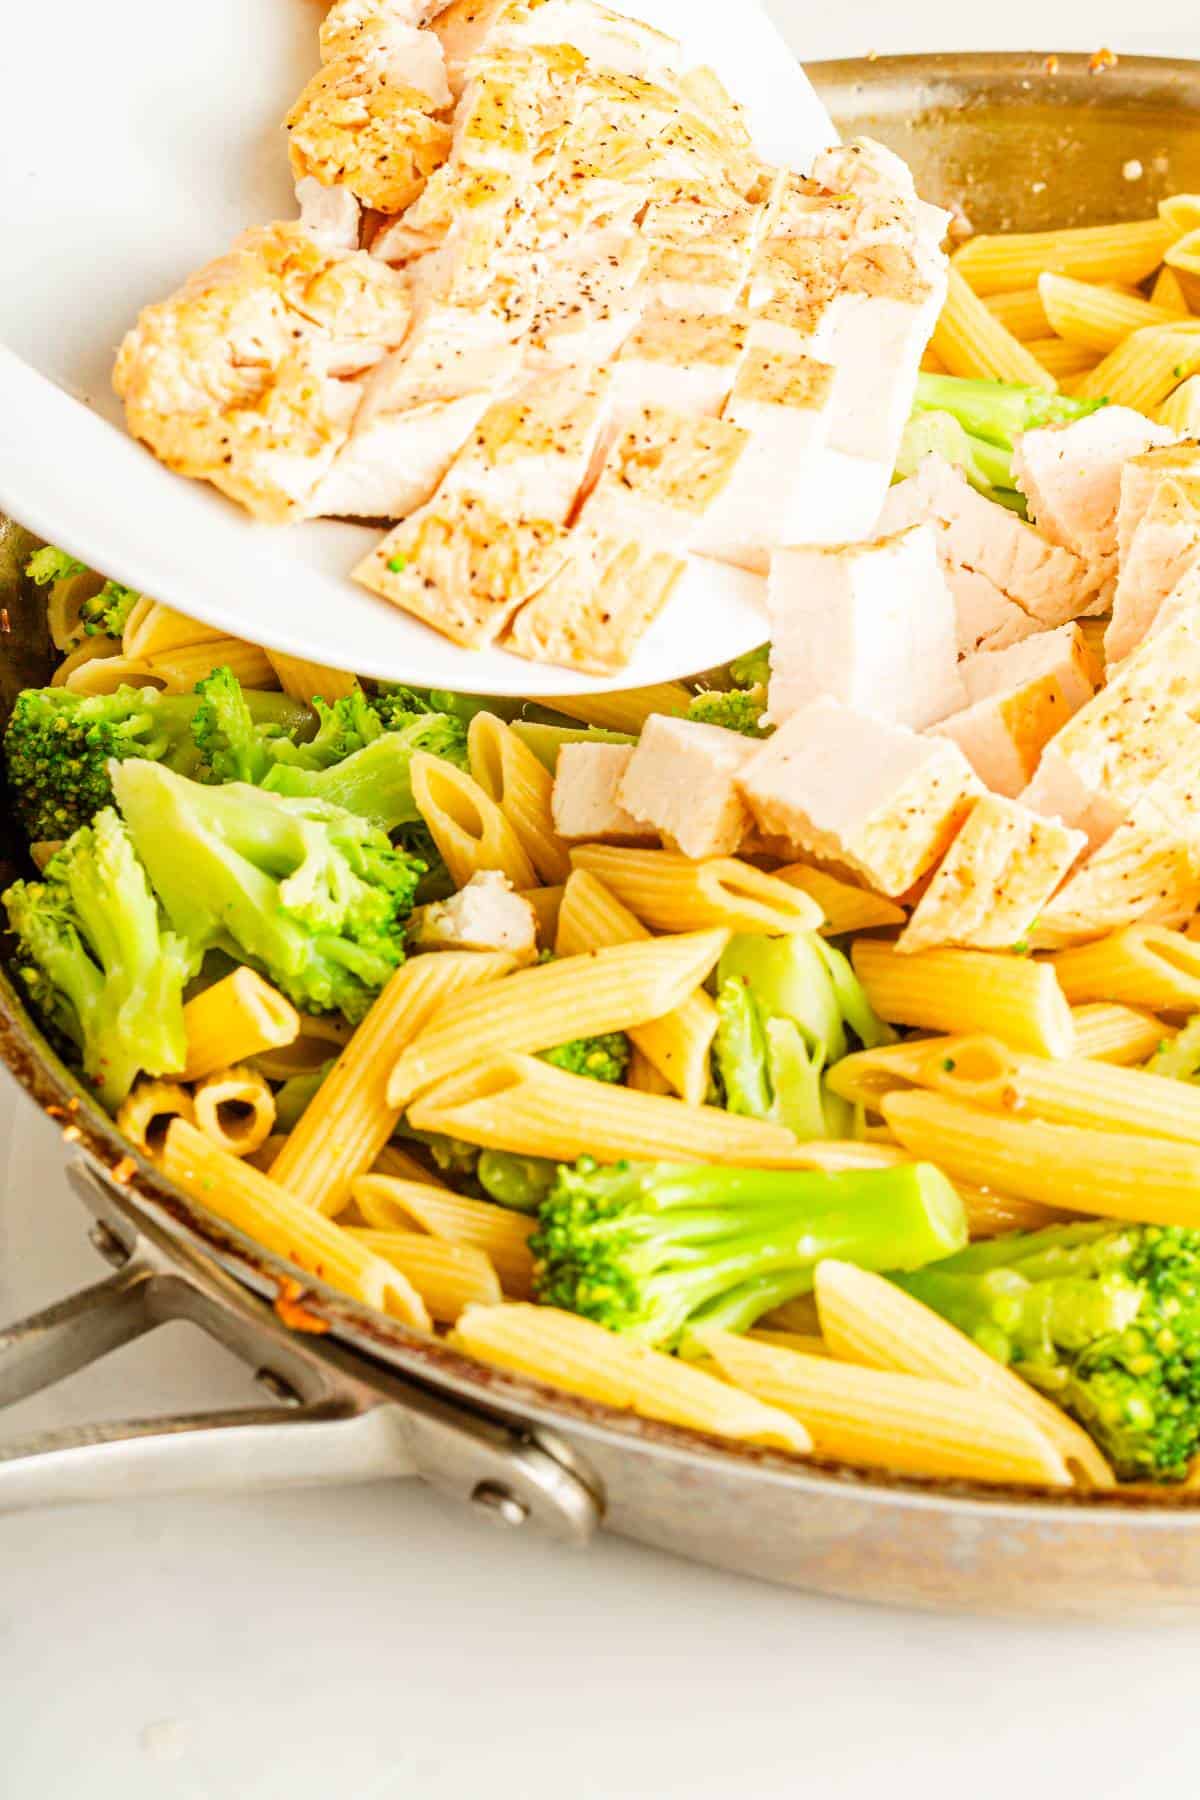 A pan of penne pasta with chicken and broccoli.